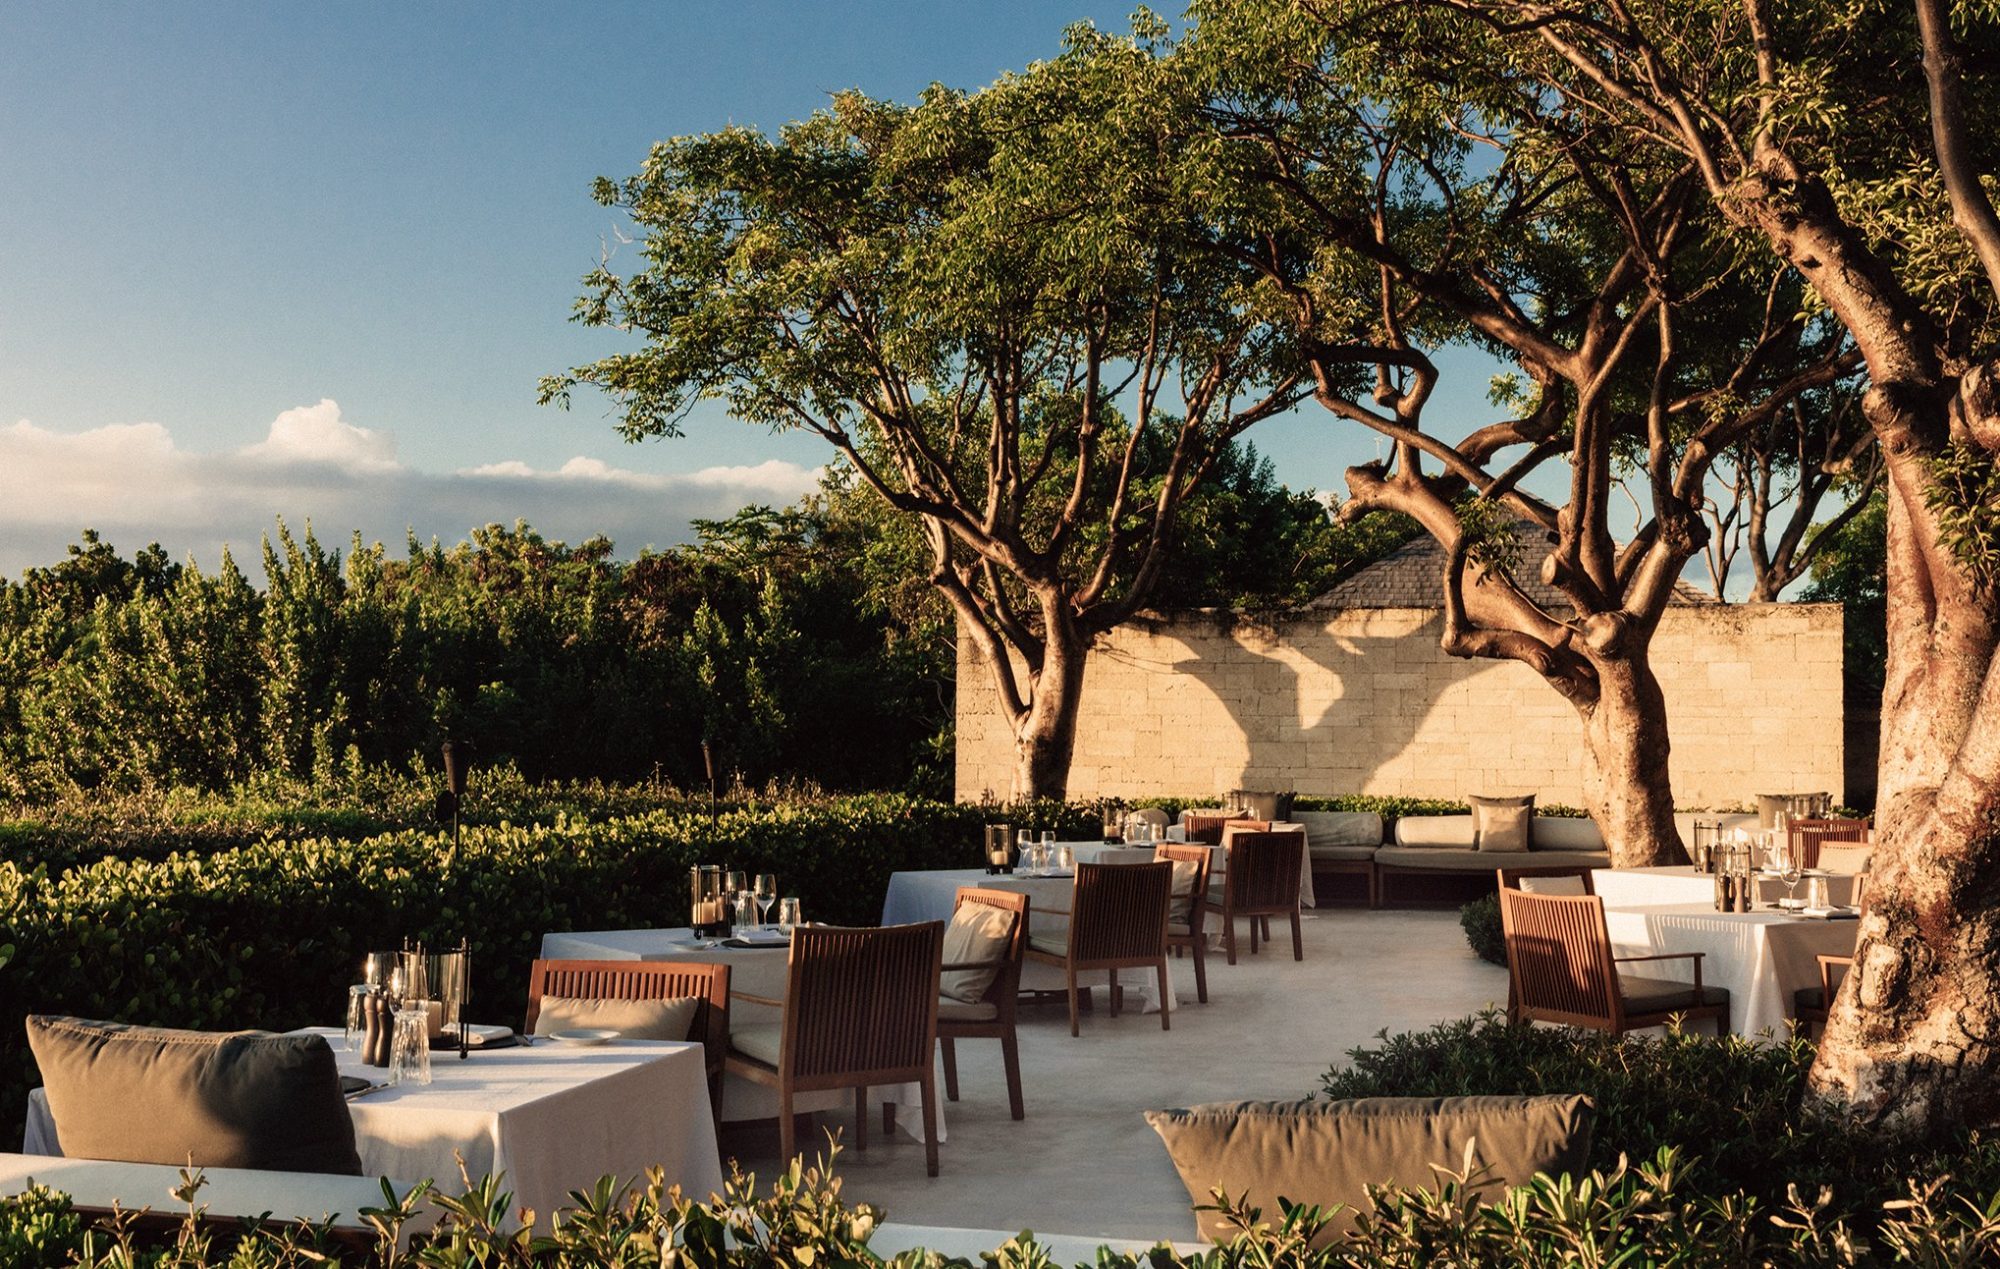 Amanyara unveils tropical luxury in the secluded splendor of Providenciales in Turks & Caicos